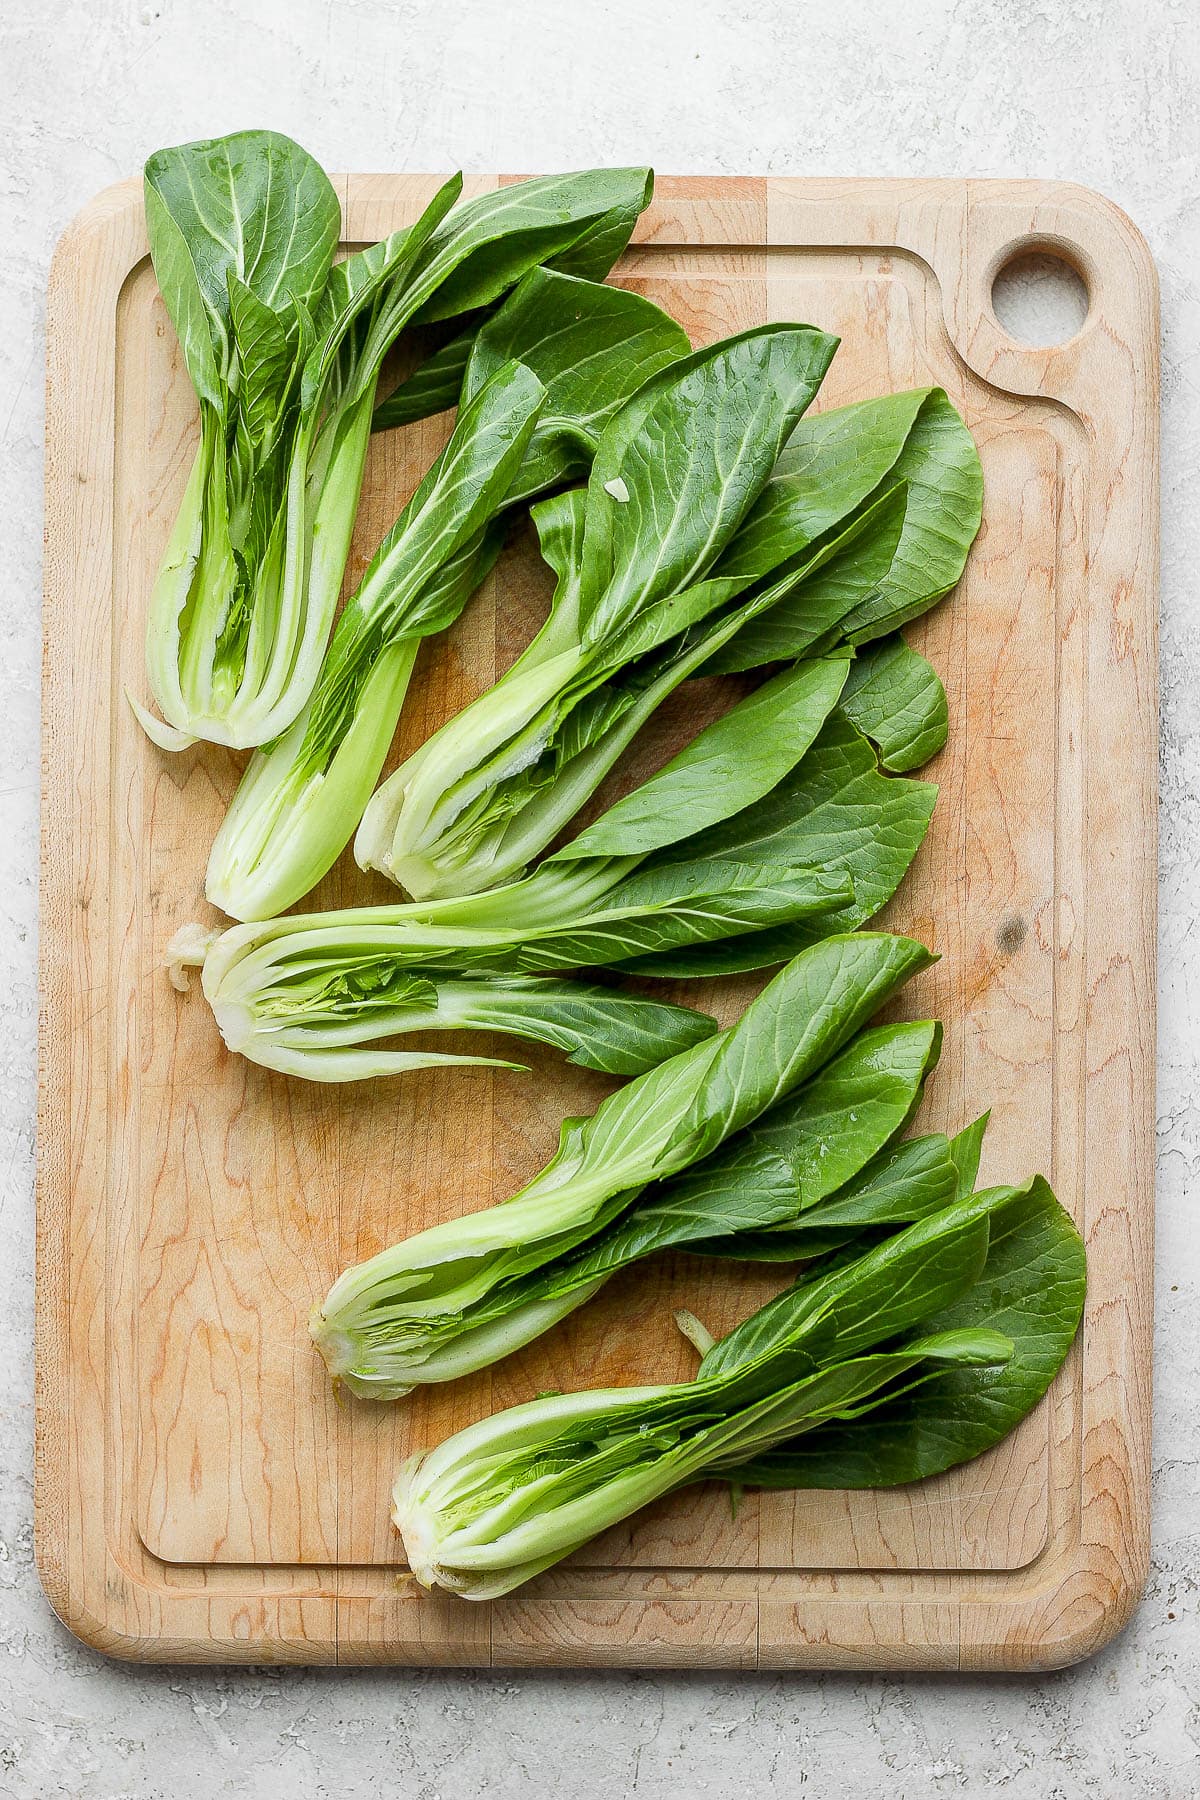 A wooden cutting board filed with baby bok choy all cut in half lengthwise. 